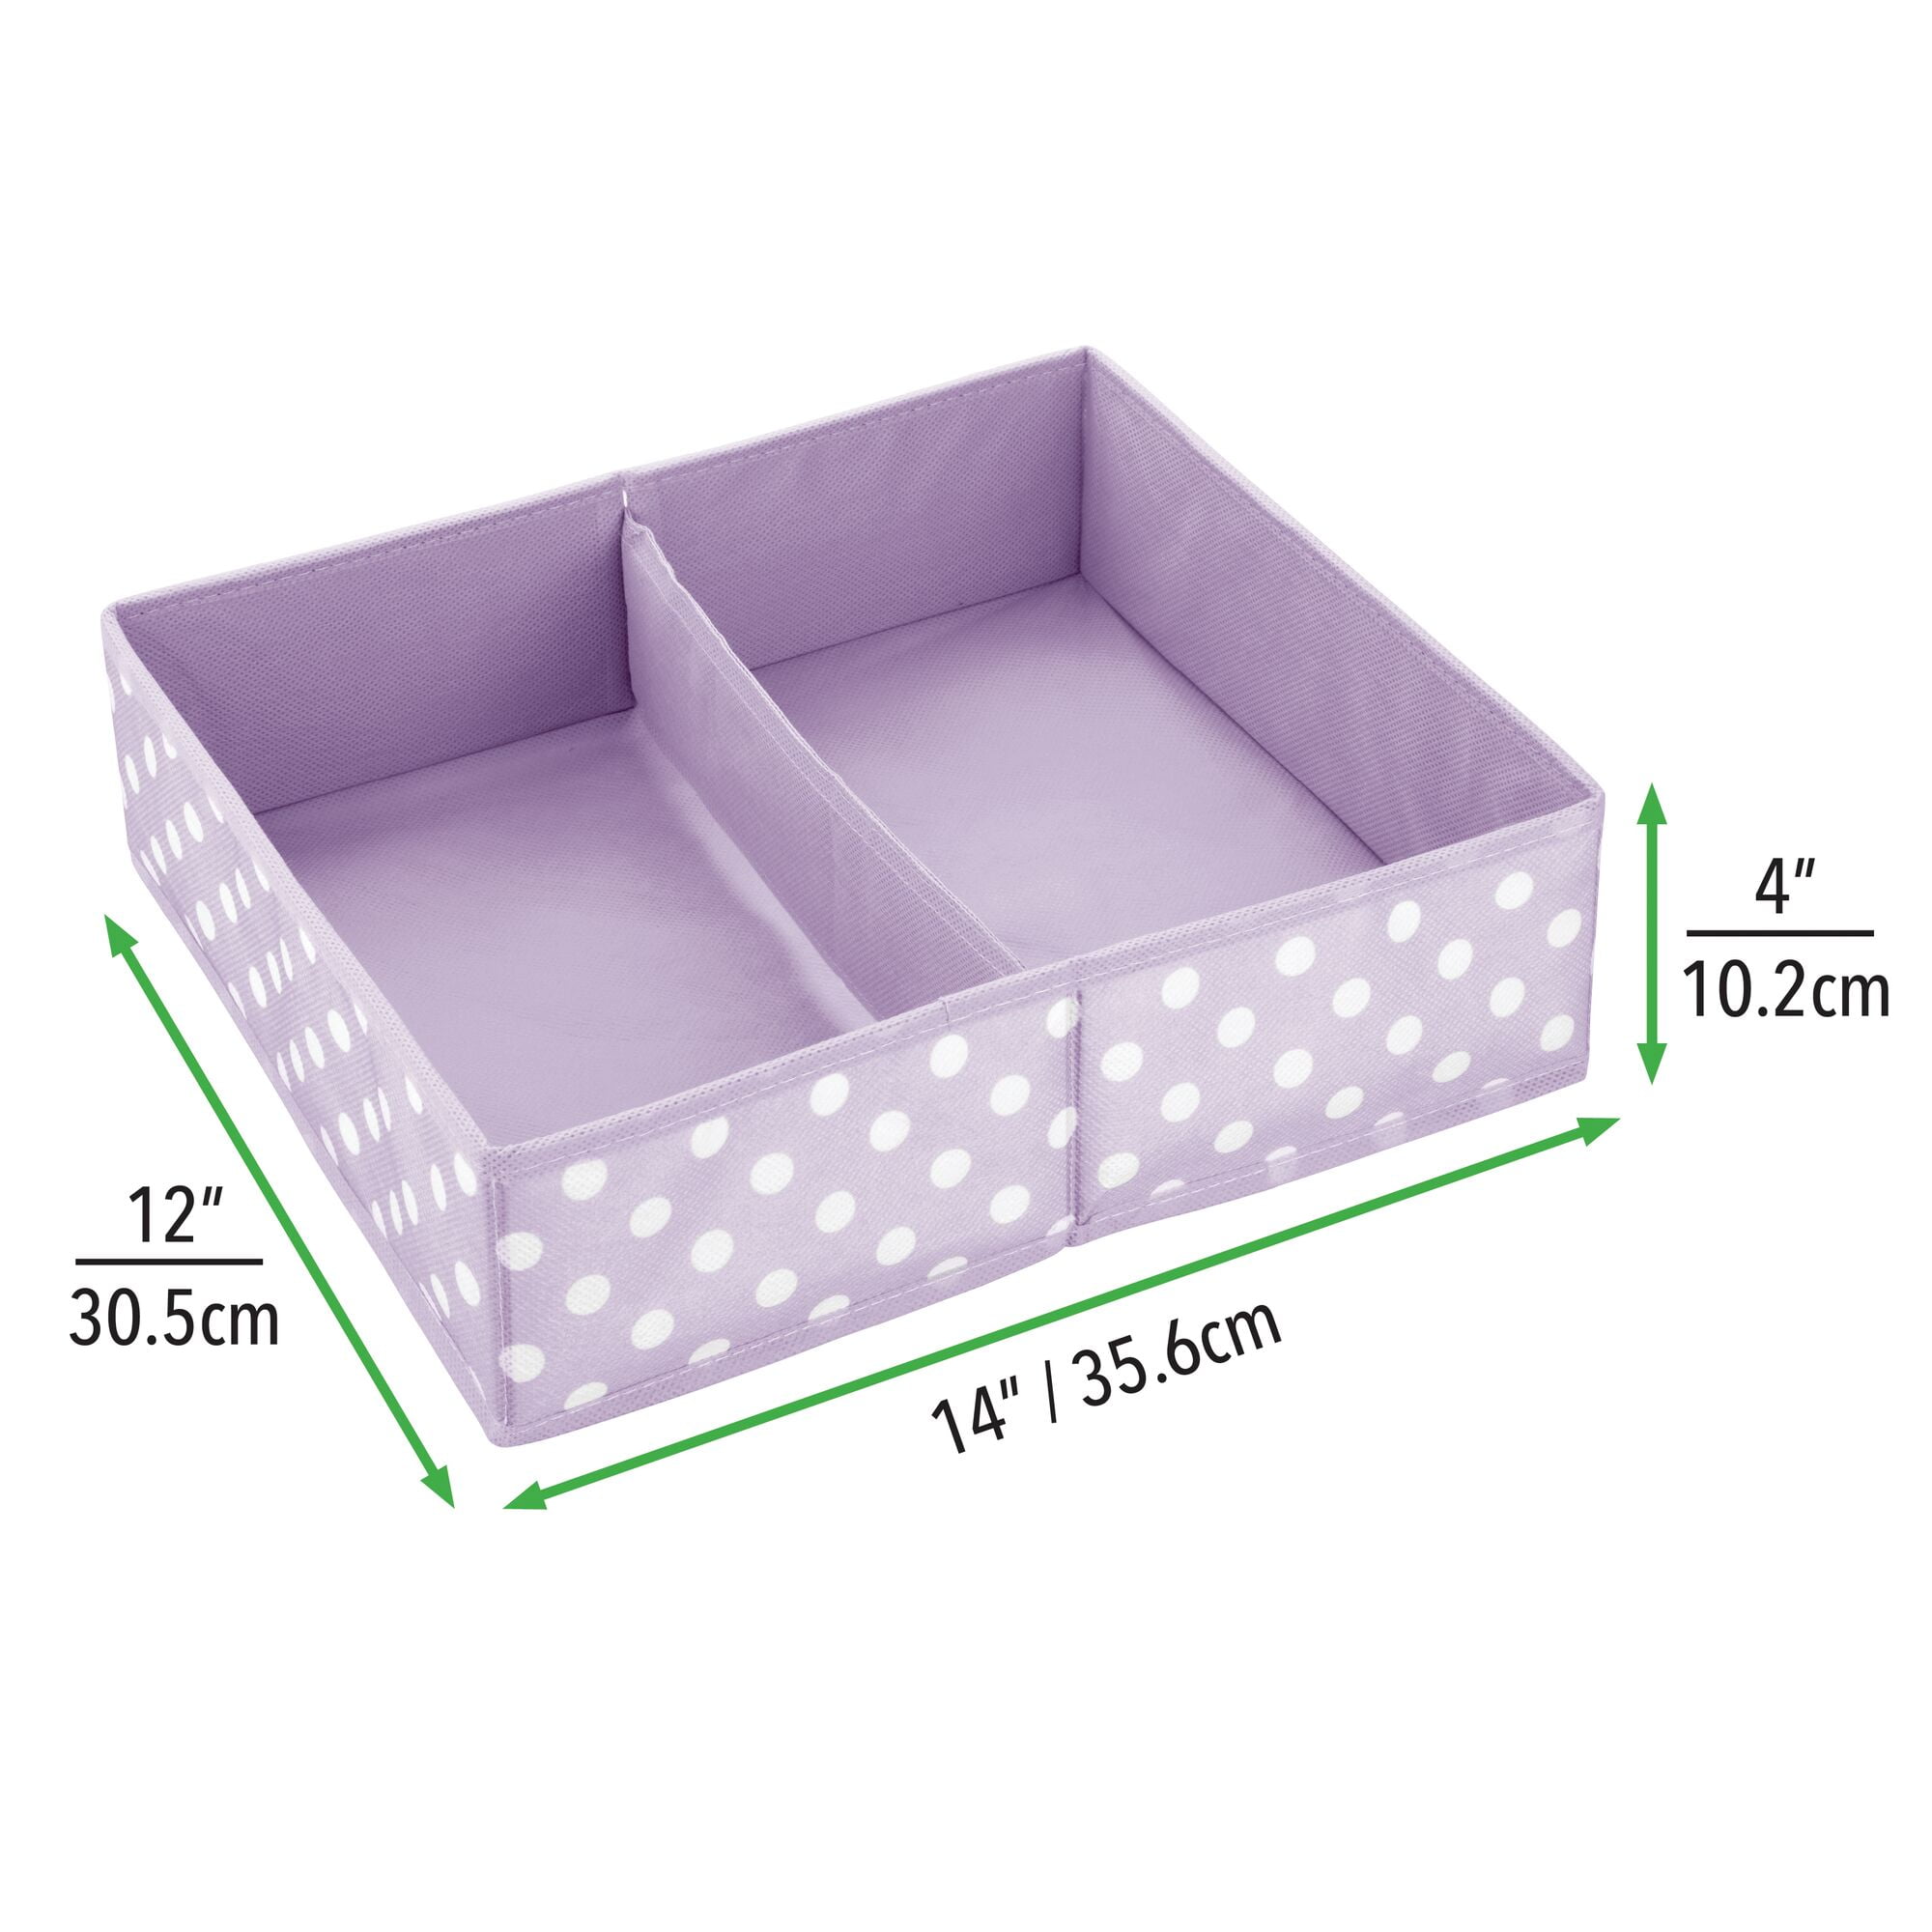 Divided 2 Section Tray Playroom Cream/White mDesign Soft Fabric Dresser Drawer and Closet Storage Organizer Bin for Child/Kids Room Nursery 3 Pack 